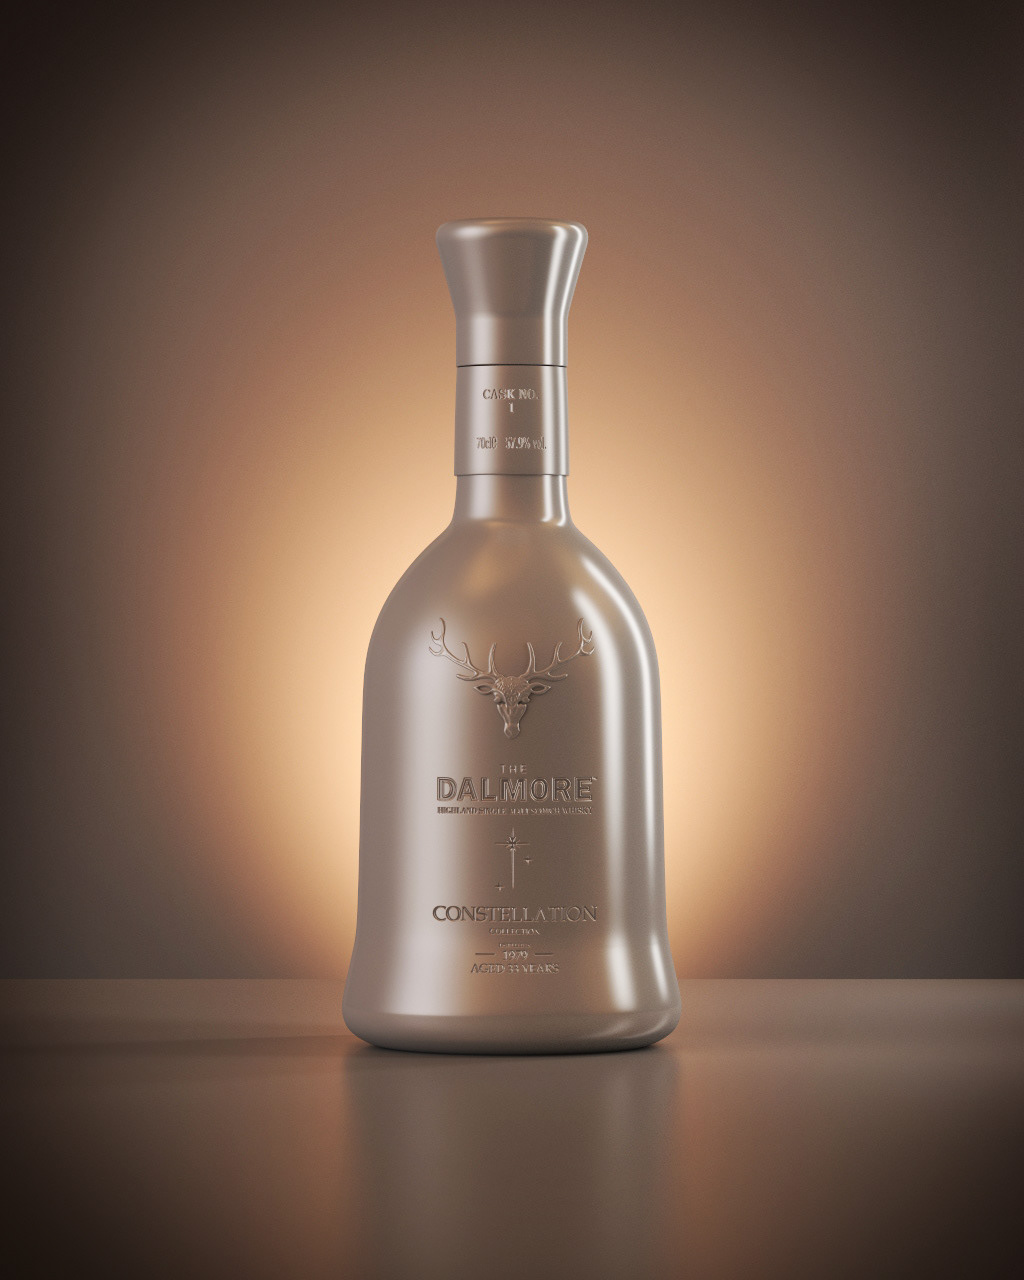 Advertising  dalmorewhisky Whisky thedalmore packagedesign productdesign branding  3dart photorealistic bottle